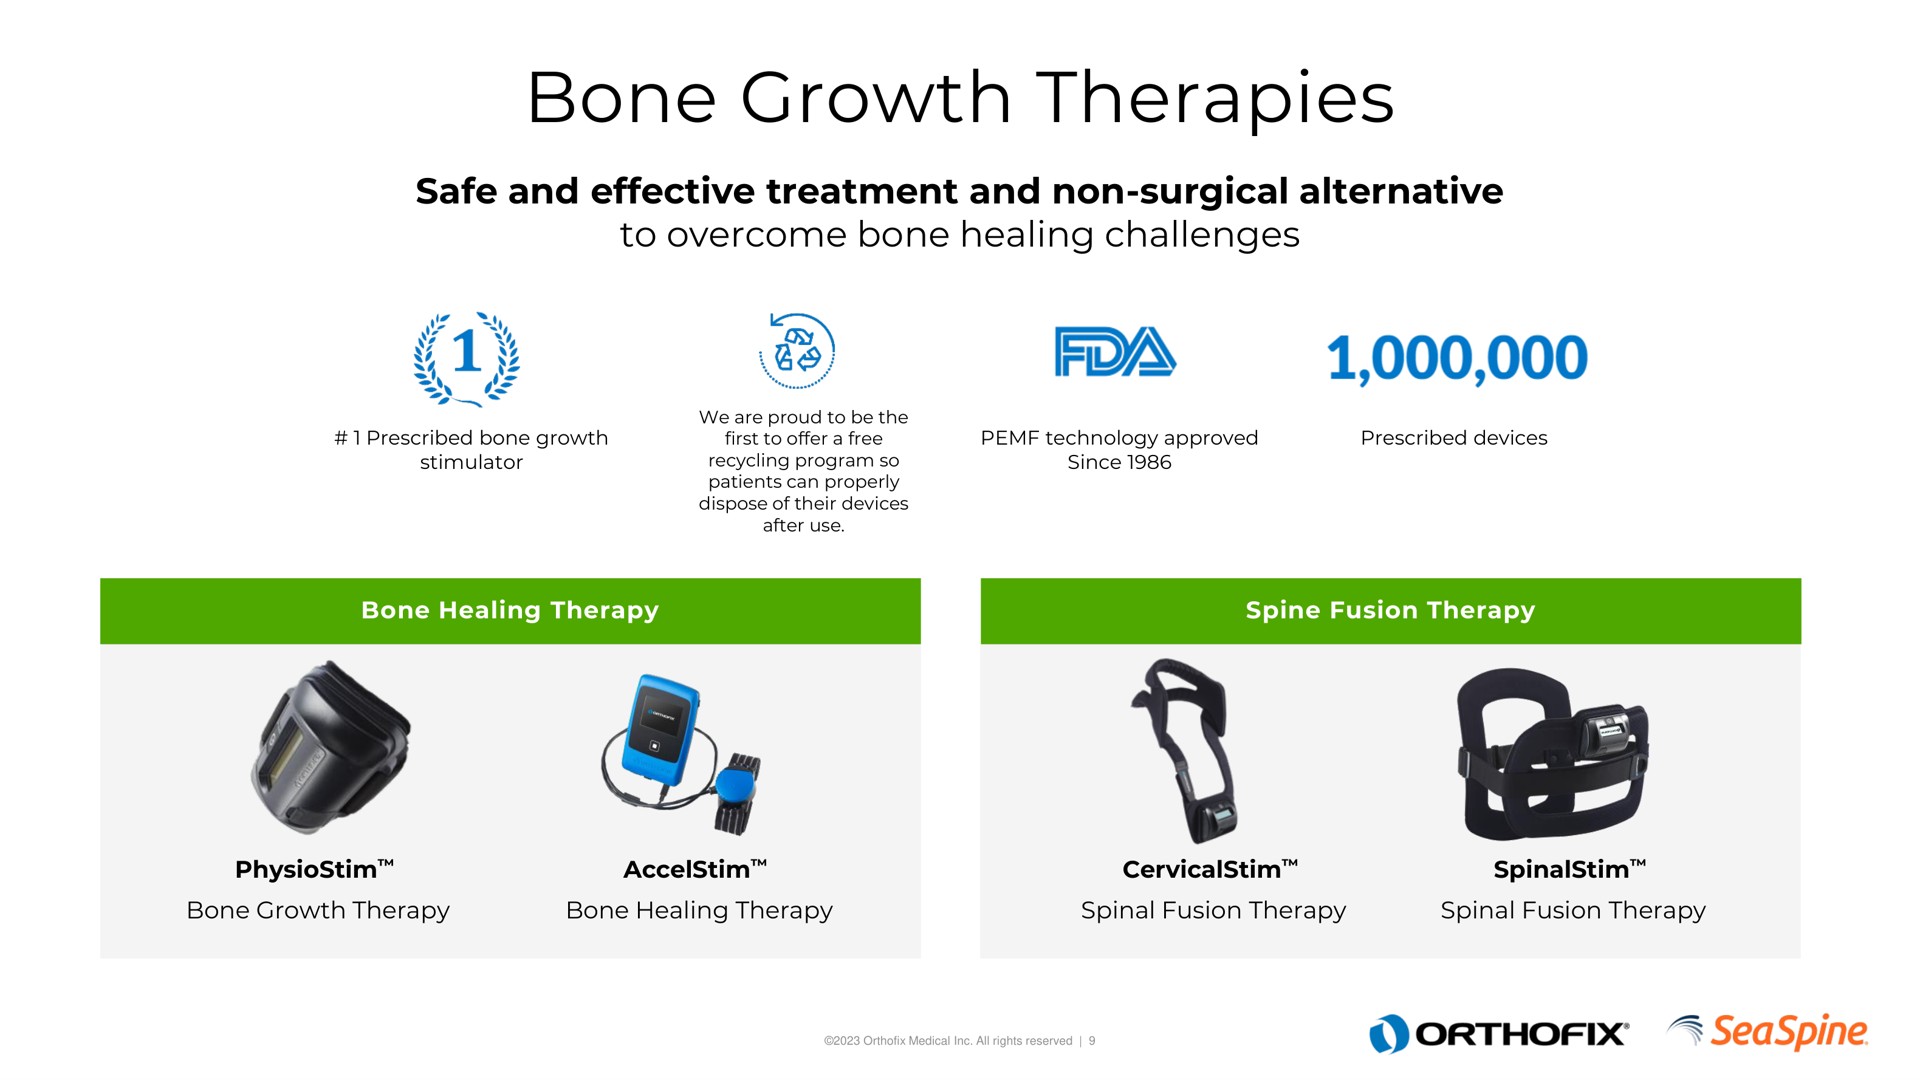 bone growth therapies safe and effective treatment and non surgical alternative to overcome healing challenges | Orthofix